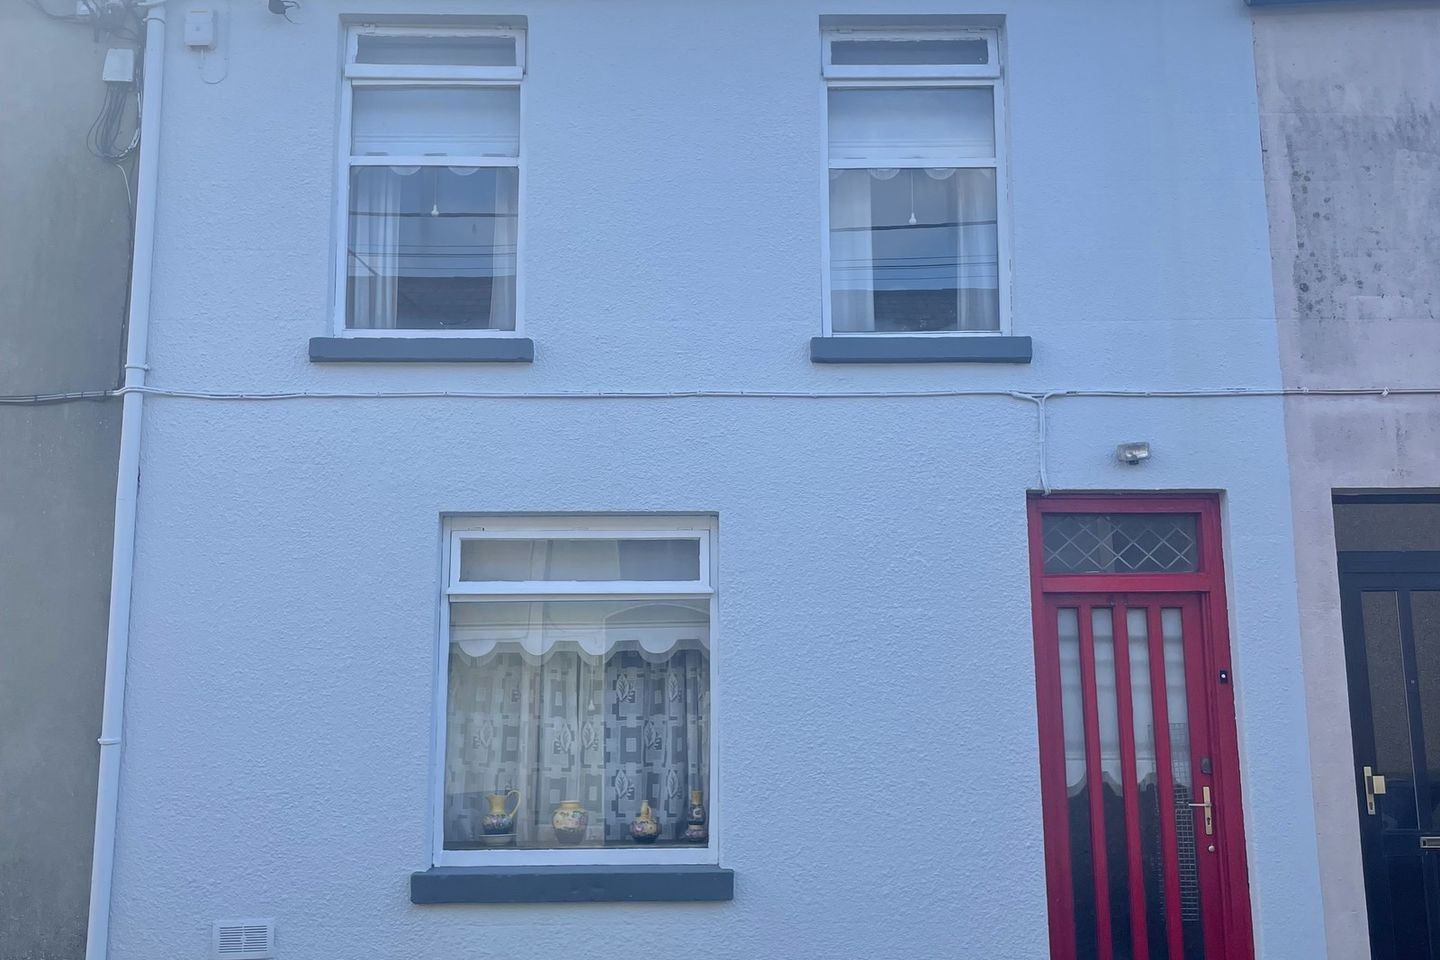 41 Saint Joseph's Terrace, Waterford City, Co. Waterford